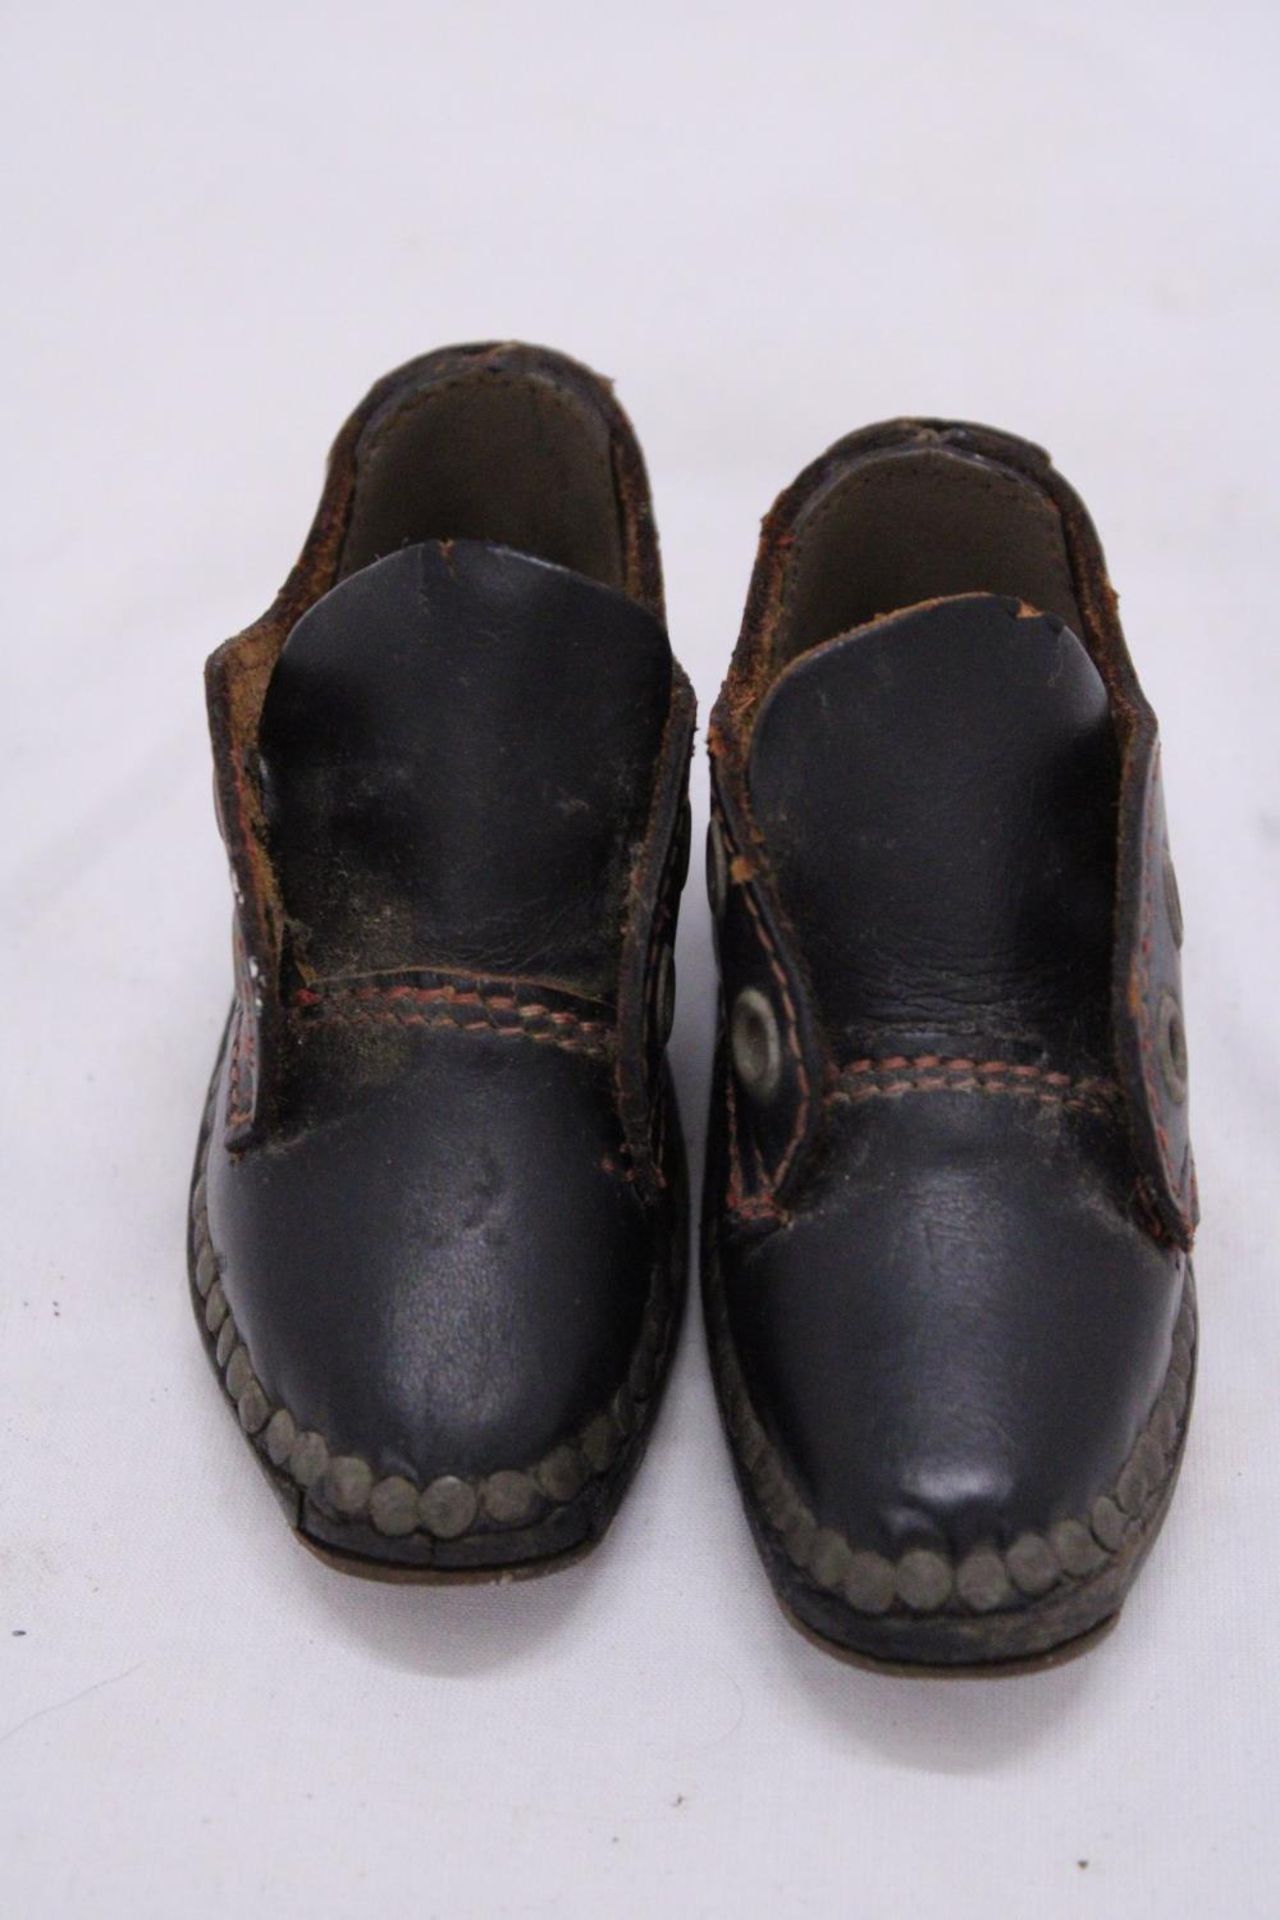 A PAIR OF VICTORIAN STYLE LEATHER (HANDMADE) CHILDREN'S SHOES